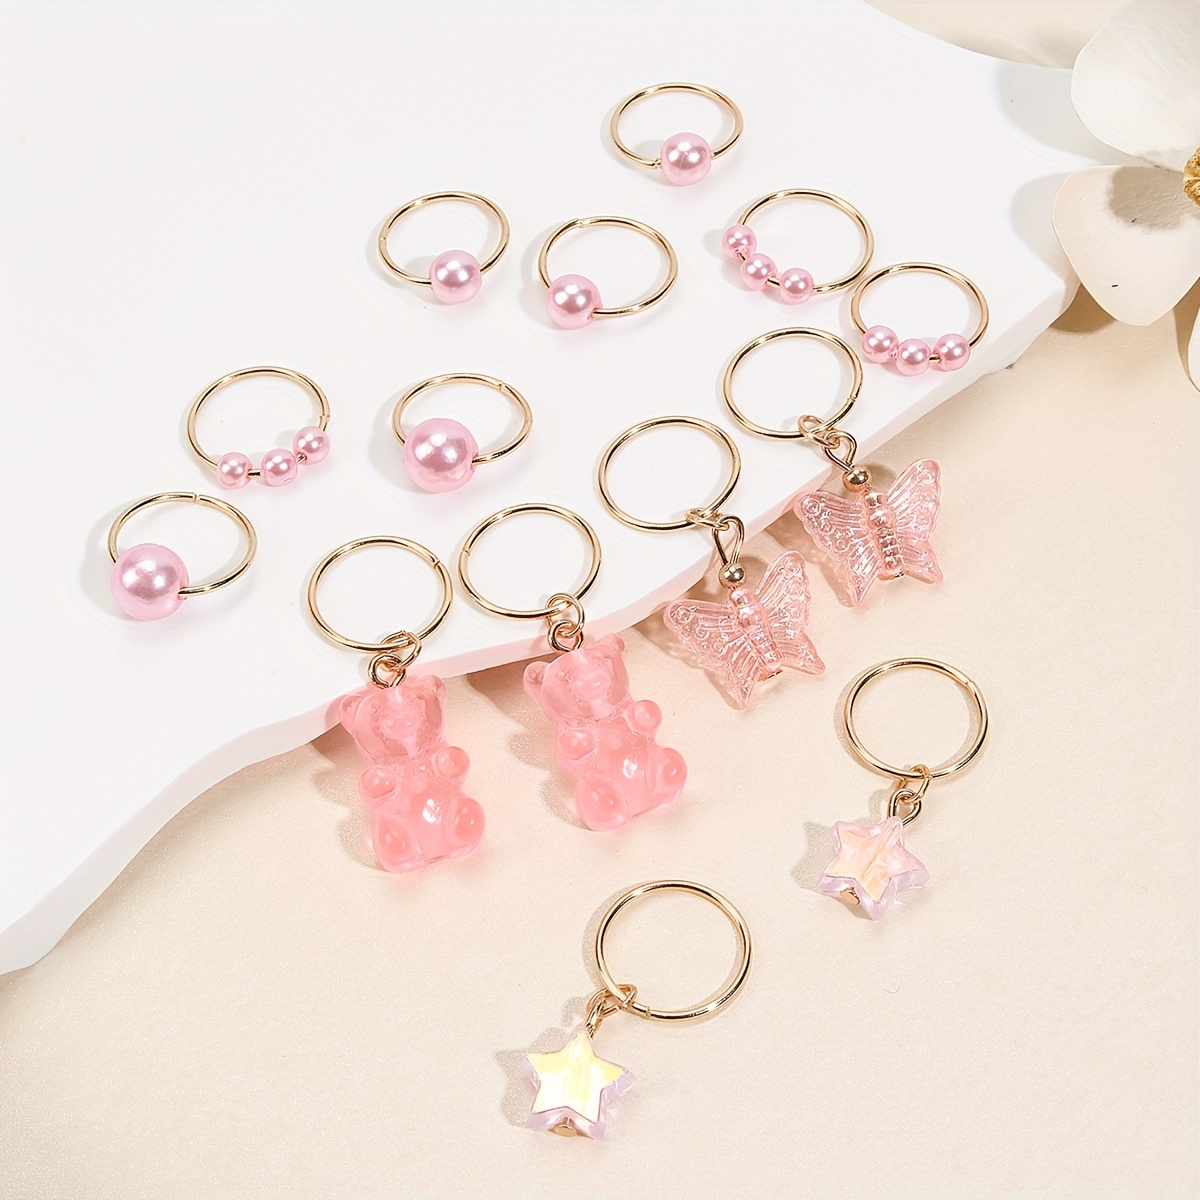 

14pcs Girls Butterfly Star Bear Hair Braid Rings Accessories, Hair Jewelry For Braids Dreadlock Rhinestone Hair Cilps Charms, Shiny Hair Rings Jewelry Decoration For Girls